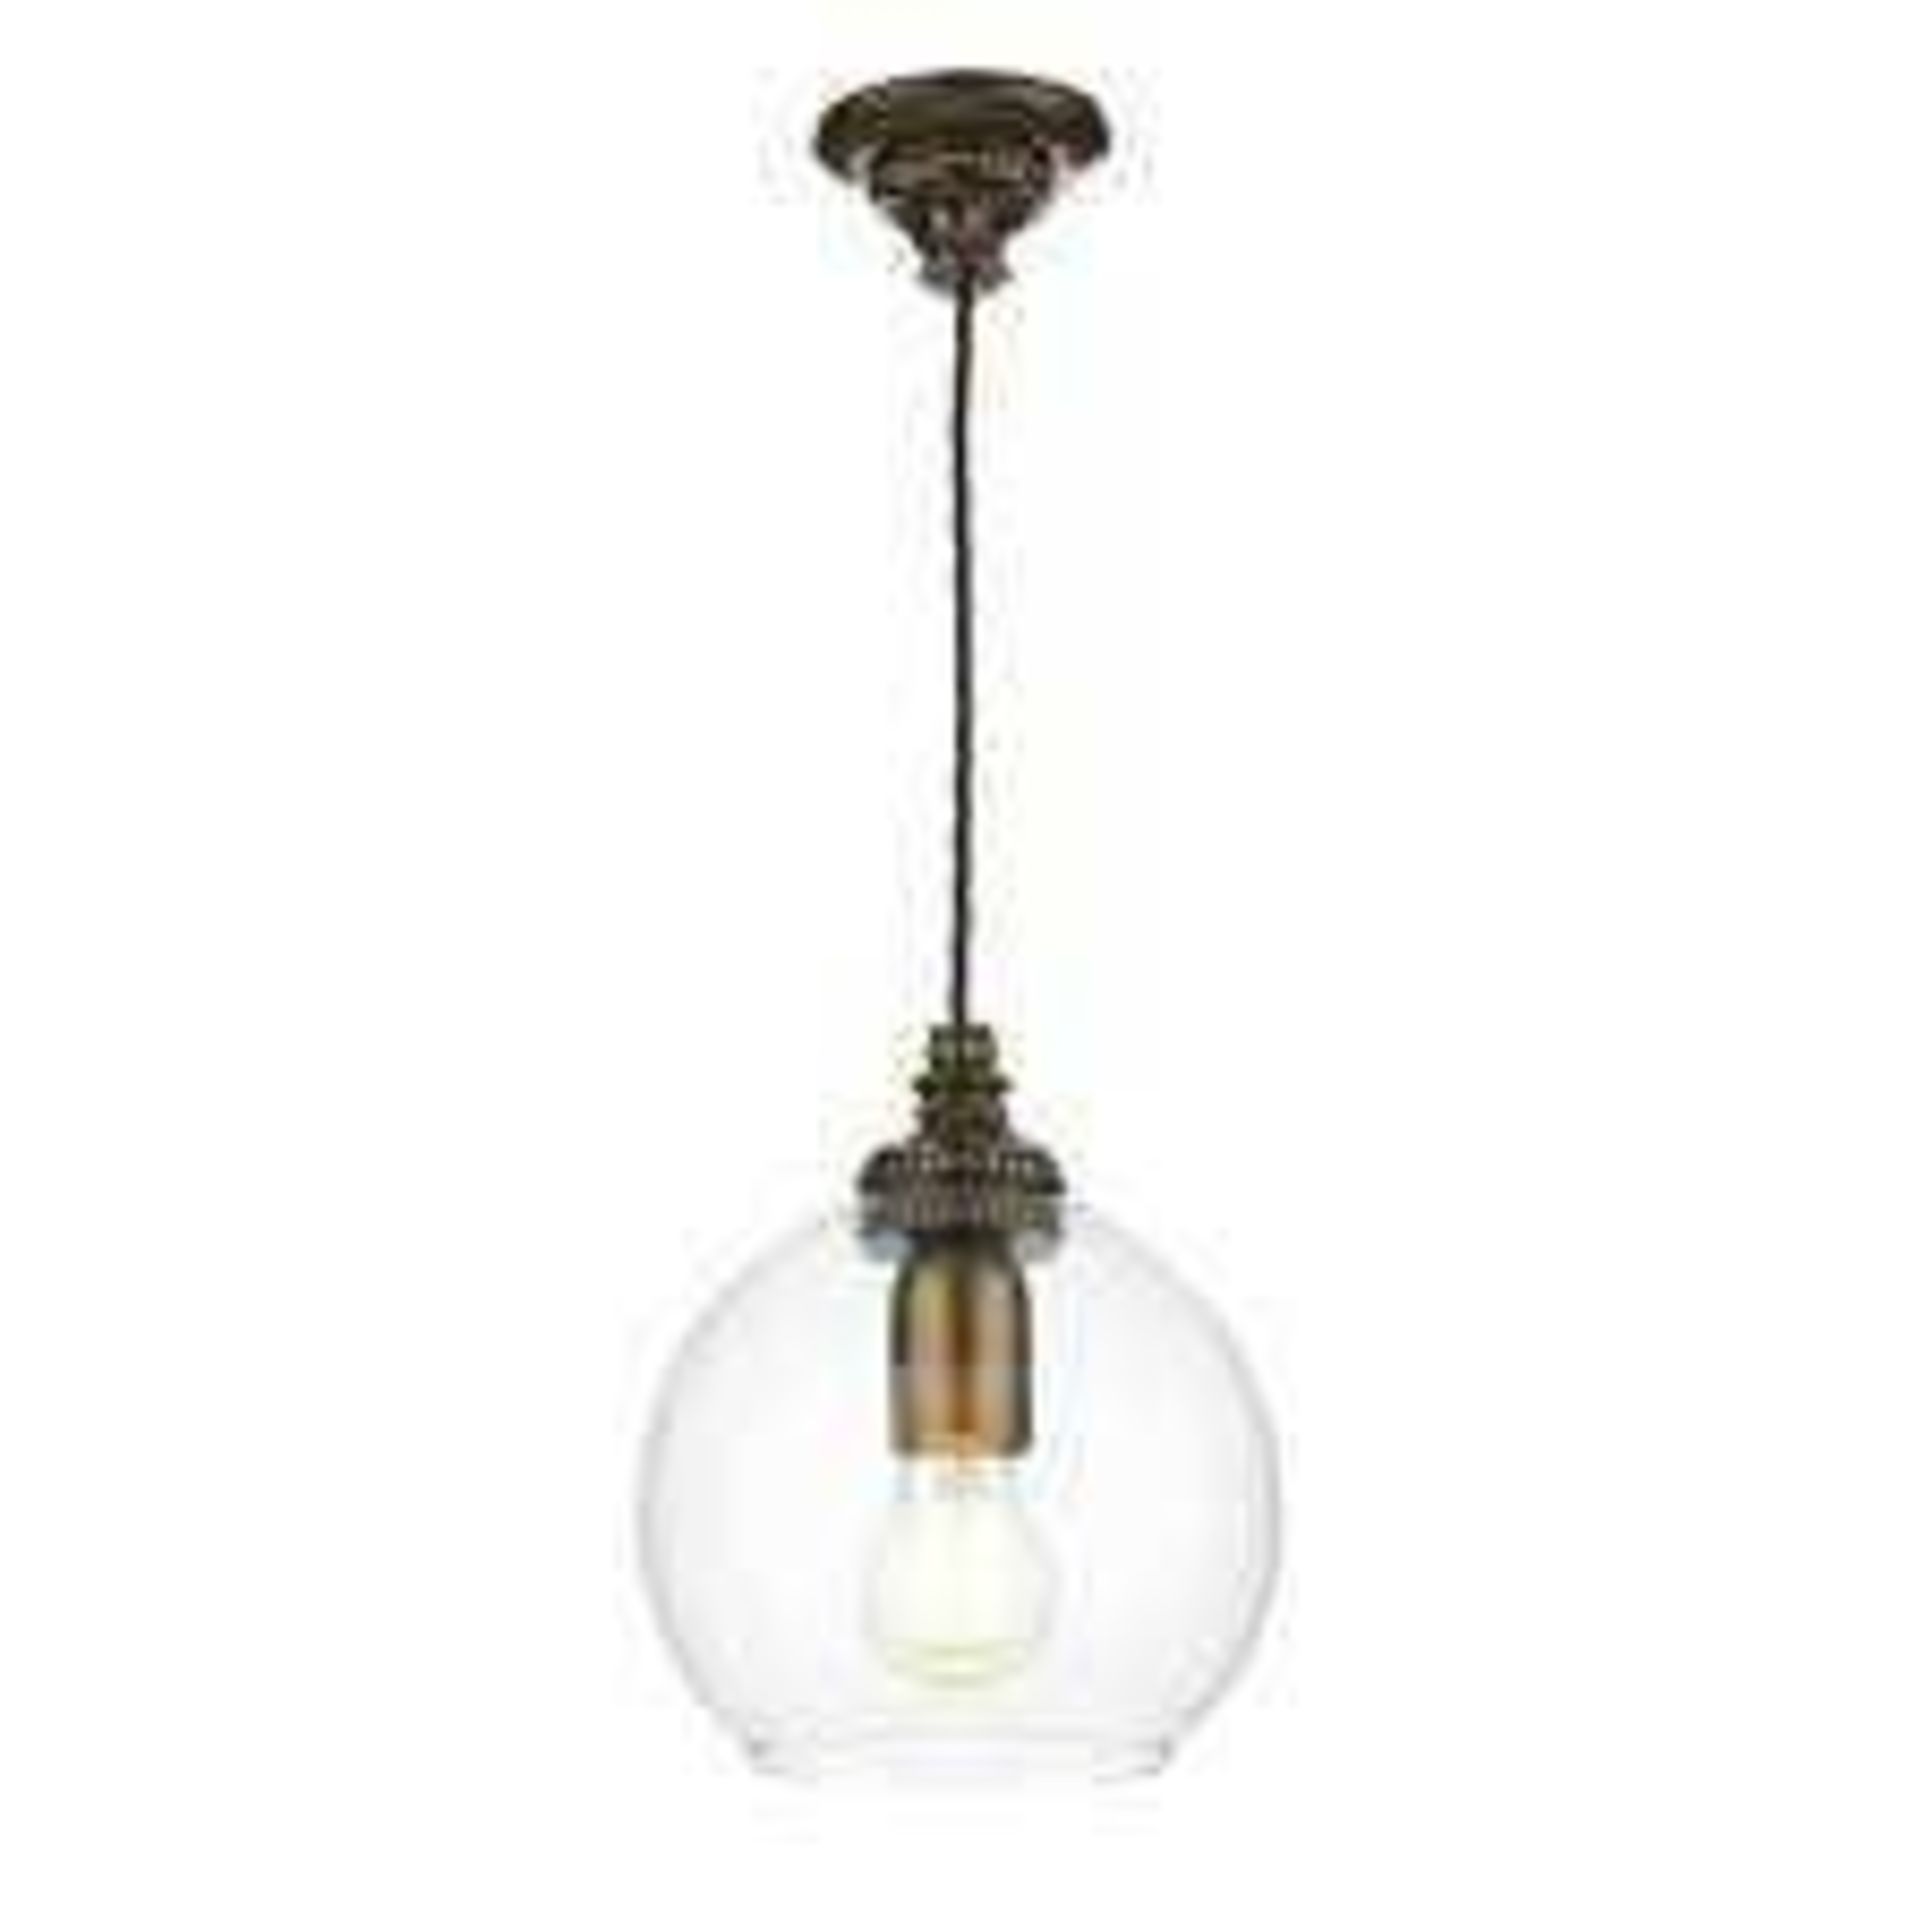 RRP £100 Unboxed Glass Globe Ceiling Light Pendant (We Do Not Ship Mattresses) (Pictures For